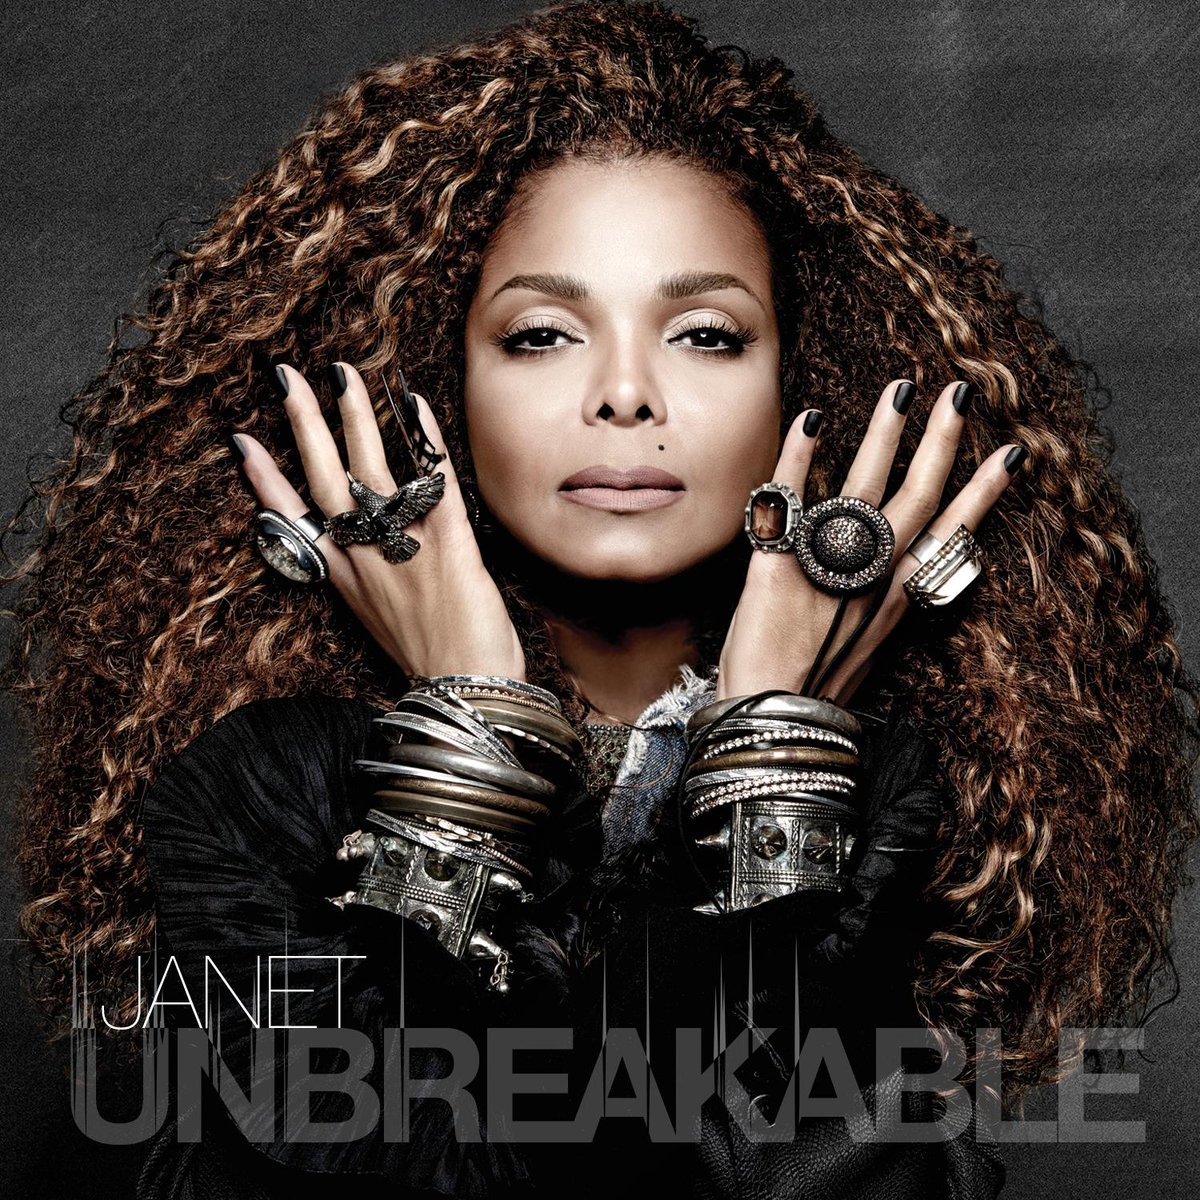 JANET JACKSON ANNOUNCES HIGHLY ANTICIPATED EUROPEAN LEG OF THE ‘#UNBREAKABLE’ WORLD TOUR http://t.co/aTHlXHb0Tj http://t.co/RP2g1yOXix